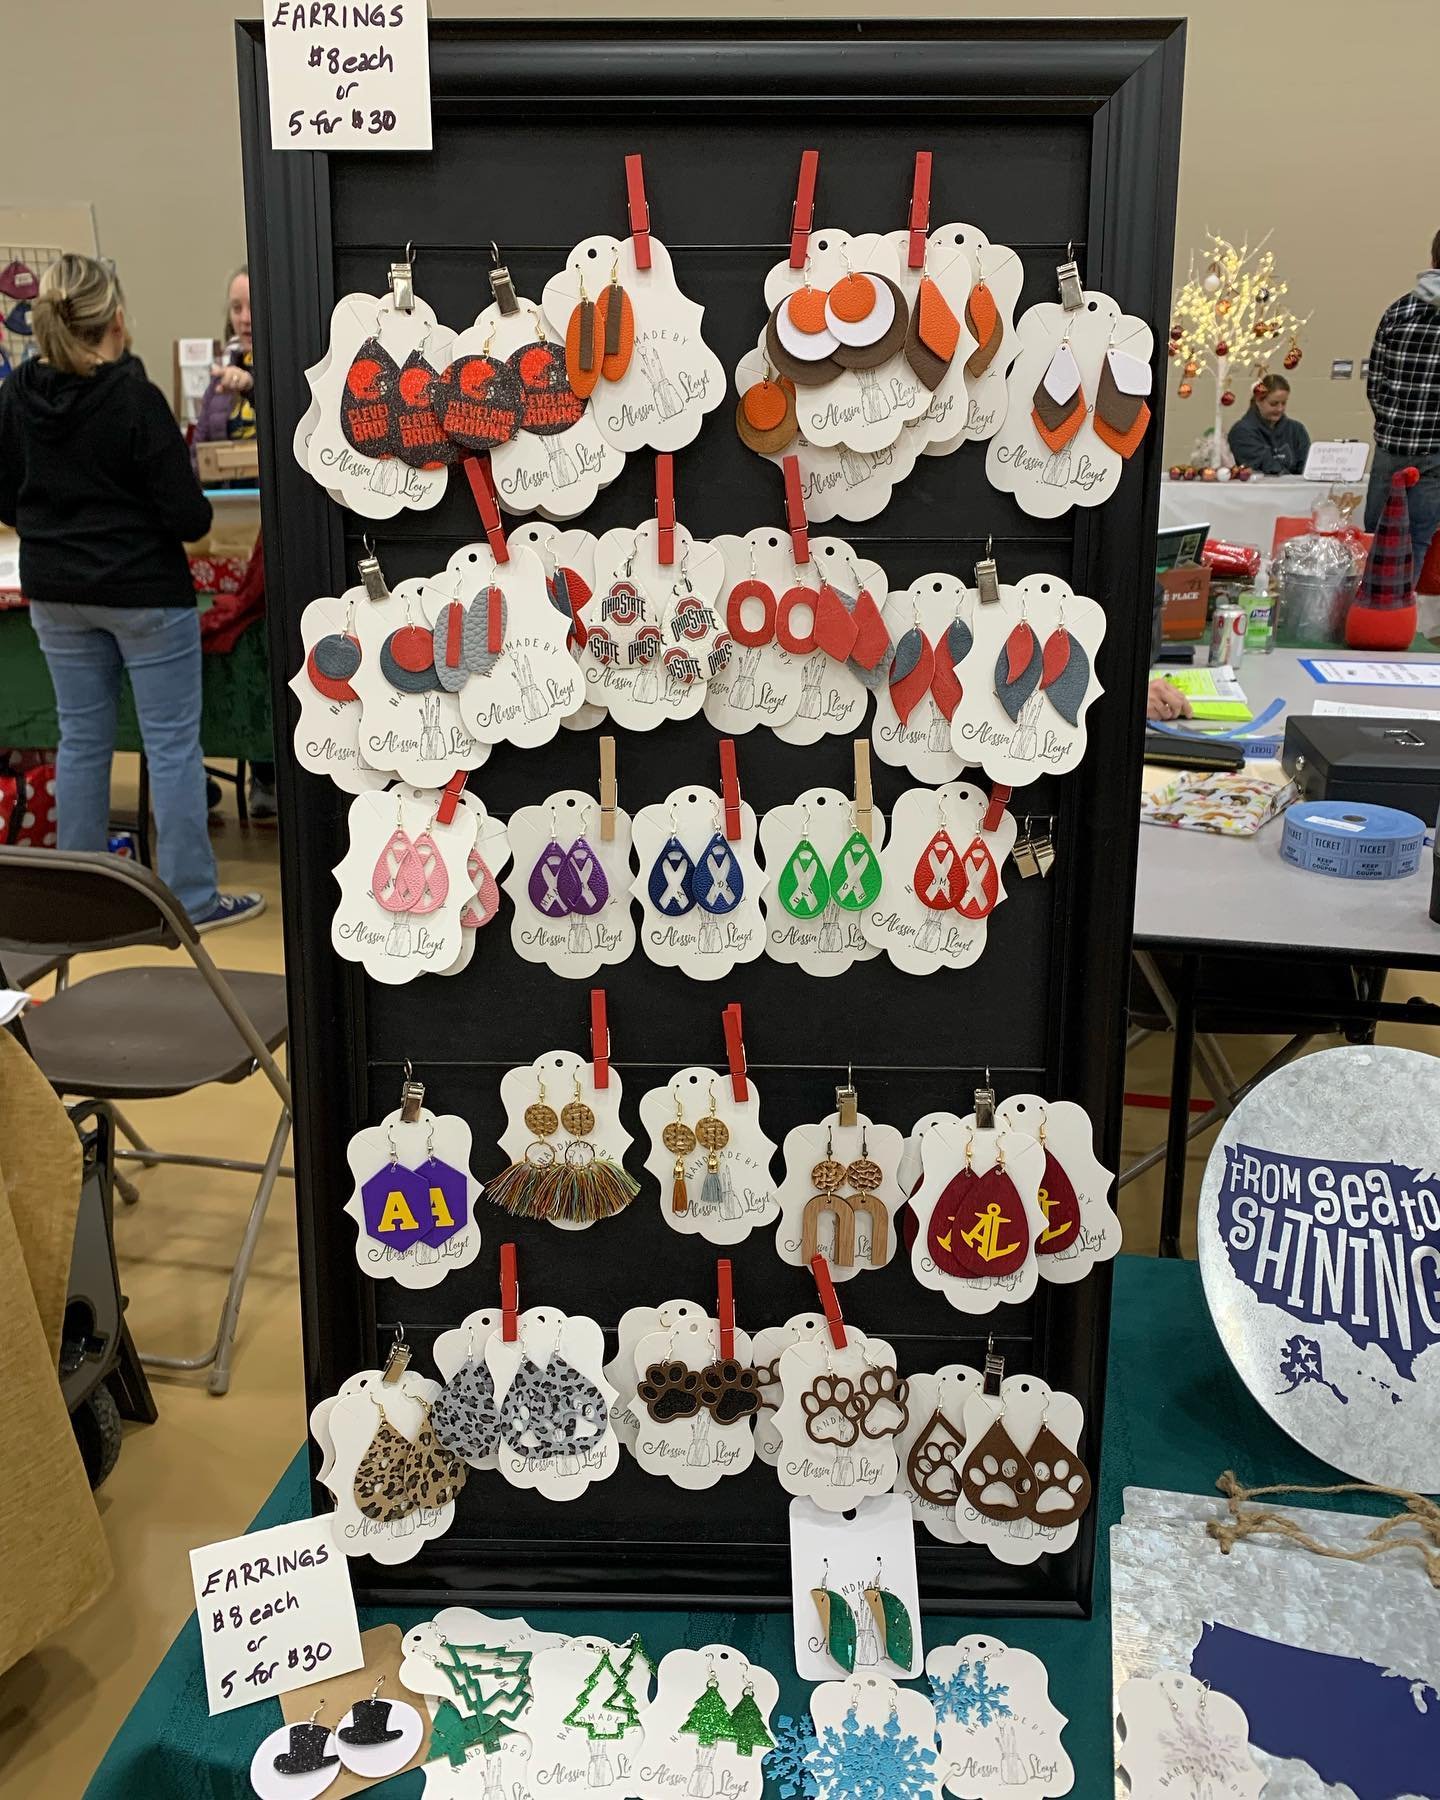 Come see us at the craft show at Avon Lake High School today until 4pm. So many great vendors and handmade designs, a great place to shop for the holidays. #shopsmall #shoplocal #handmade #imadethat #handmadeholiday